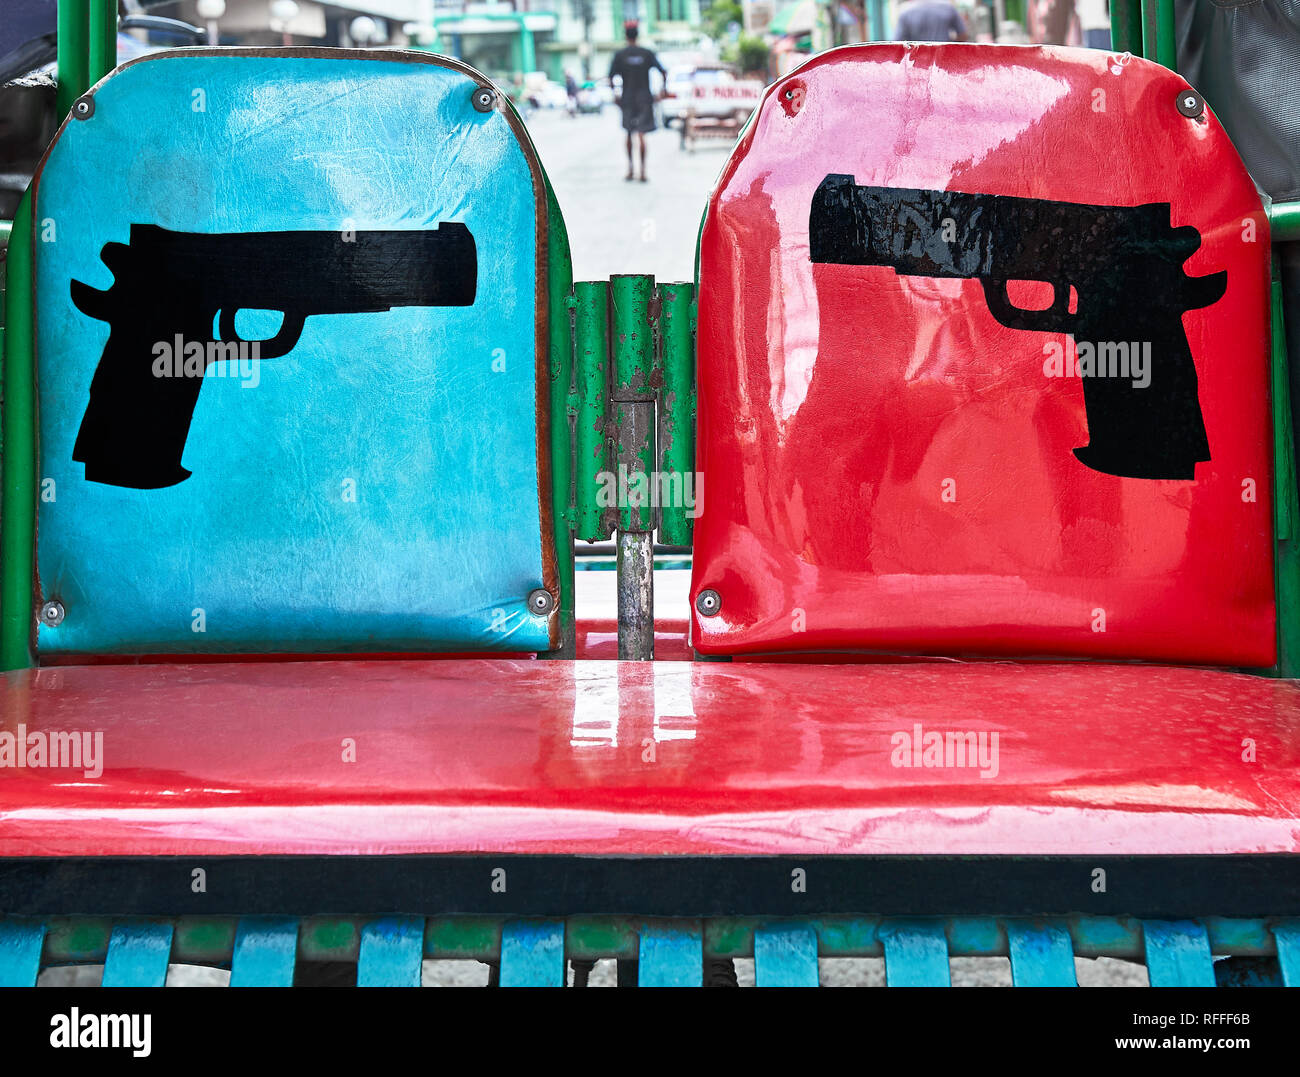 Seats of a pedicab, bicycle with sidecar, decorated with two guns facing each other, seen in Iloilo City, Philippines Stock Photo